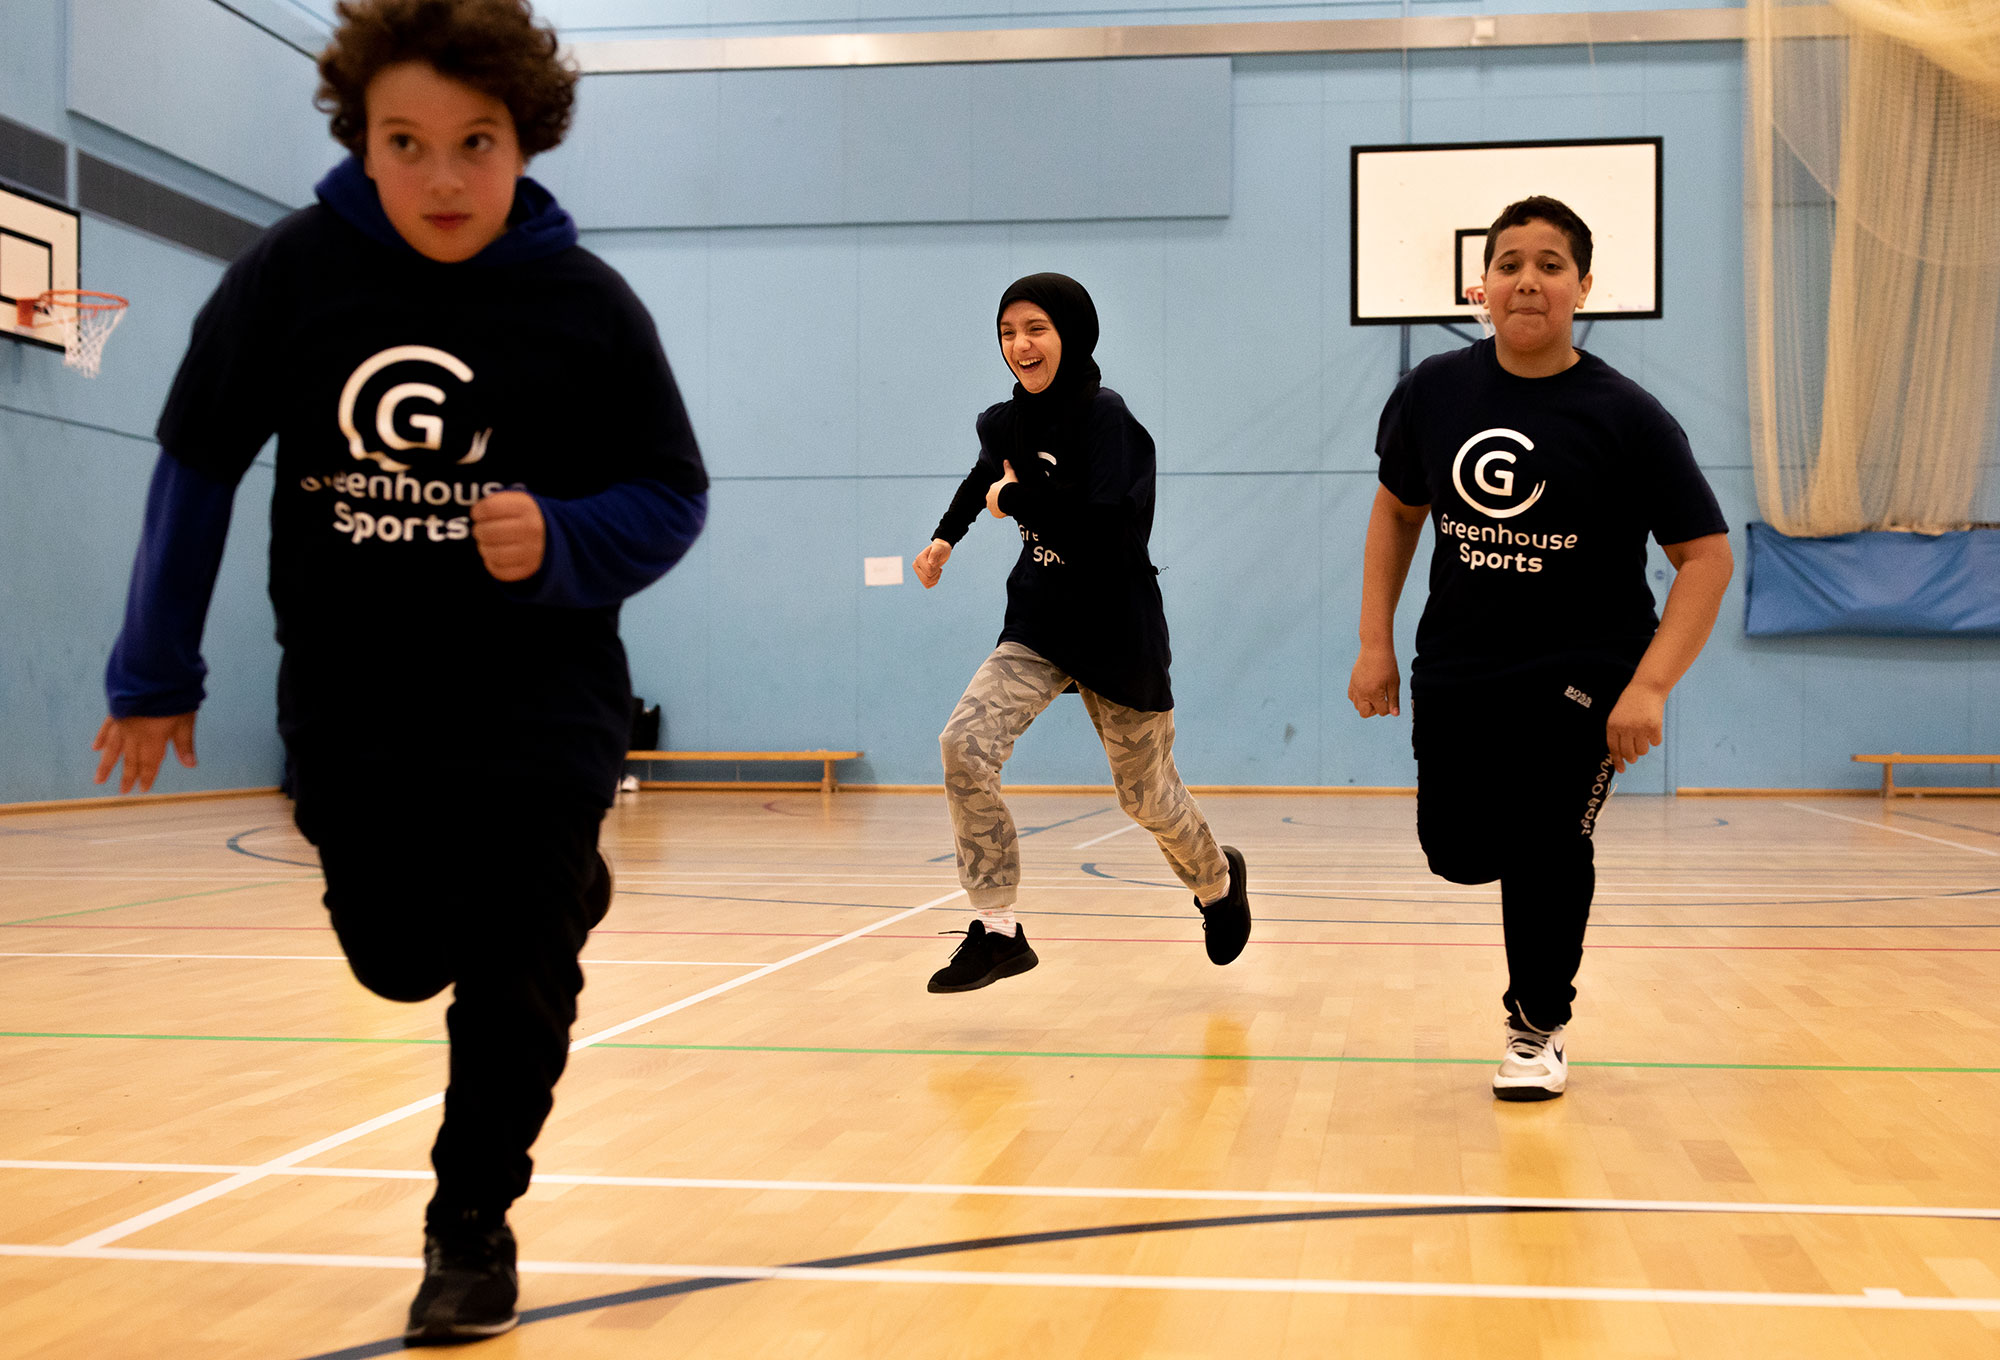 Up to £57m investment received for schools to open their sports facilities to support communities to be more active